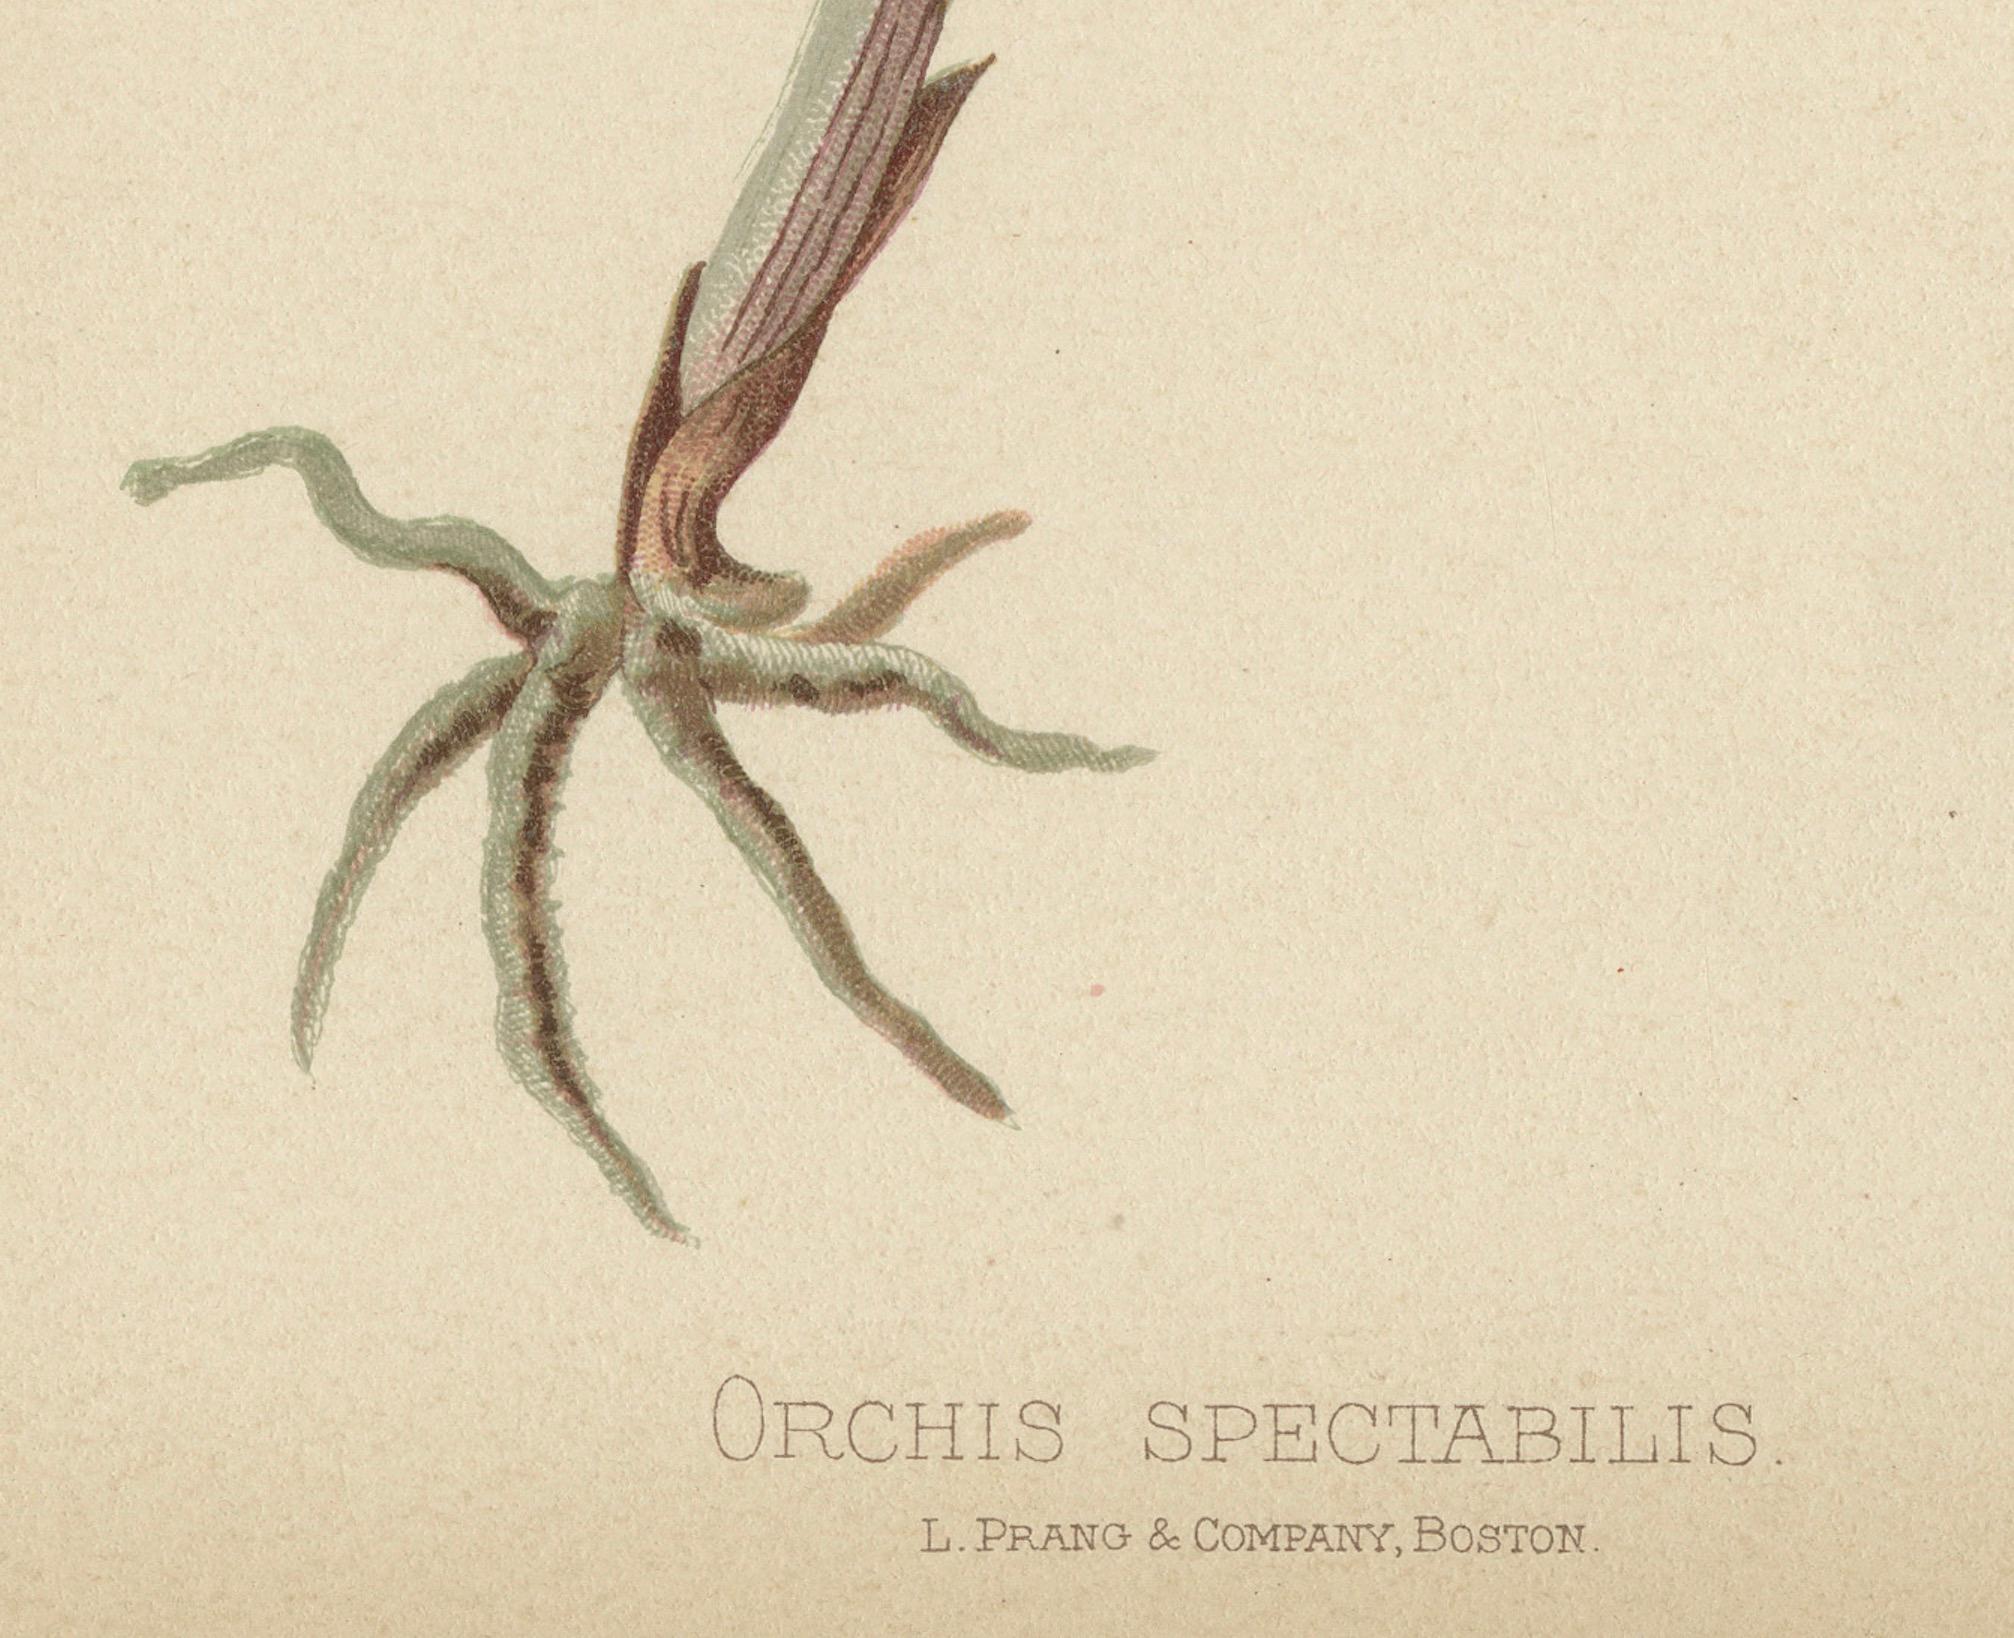 Late 19th Century Elegant Showy Orchis: The Grace of Orchis Spectabilis, 1879